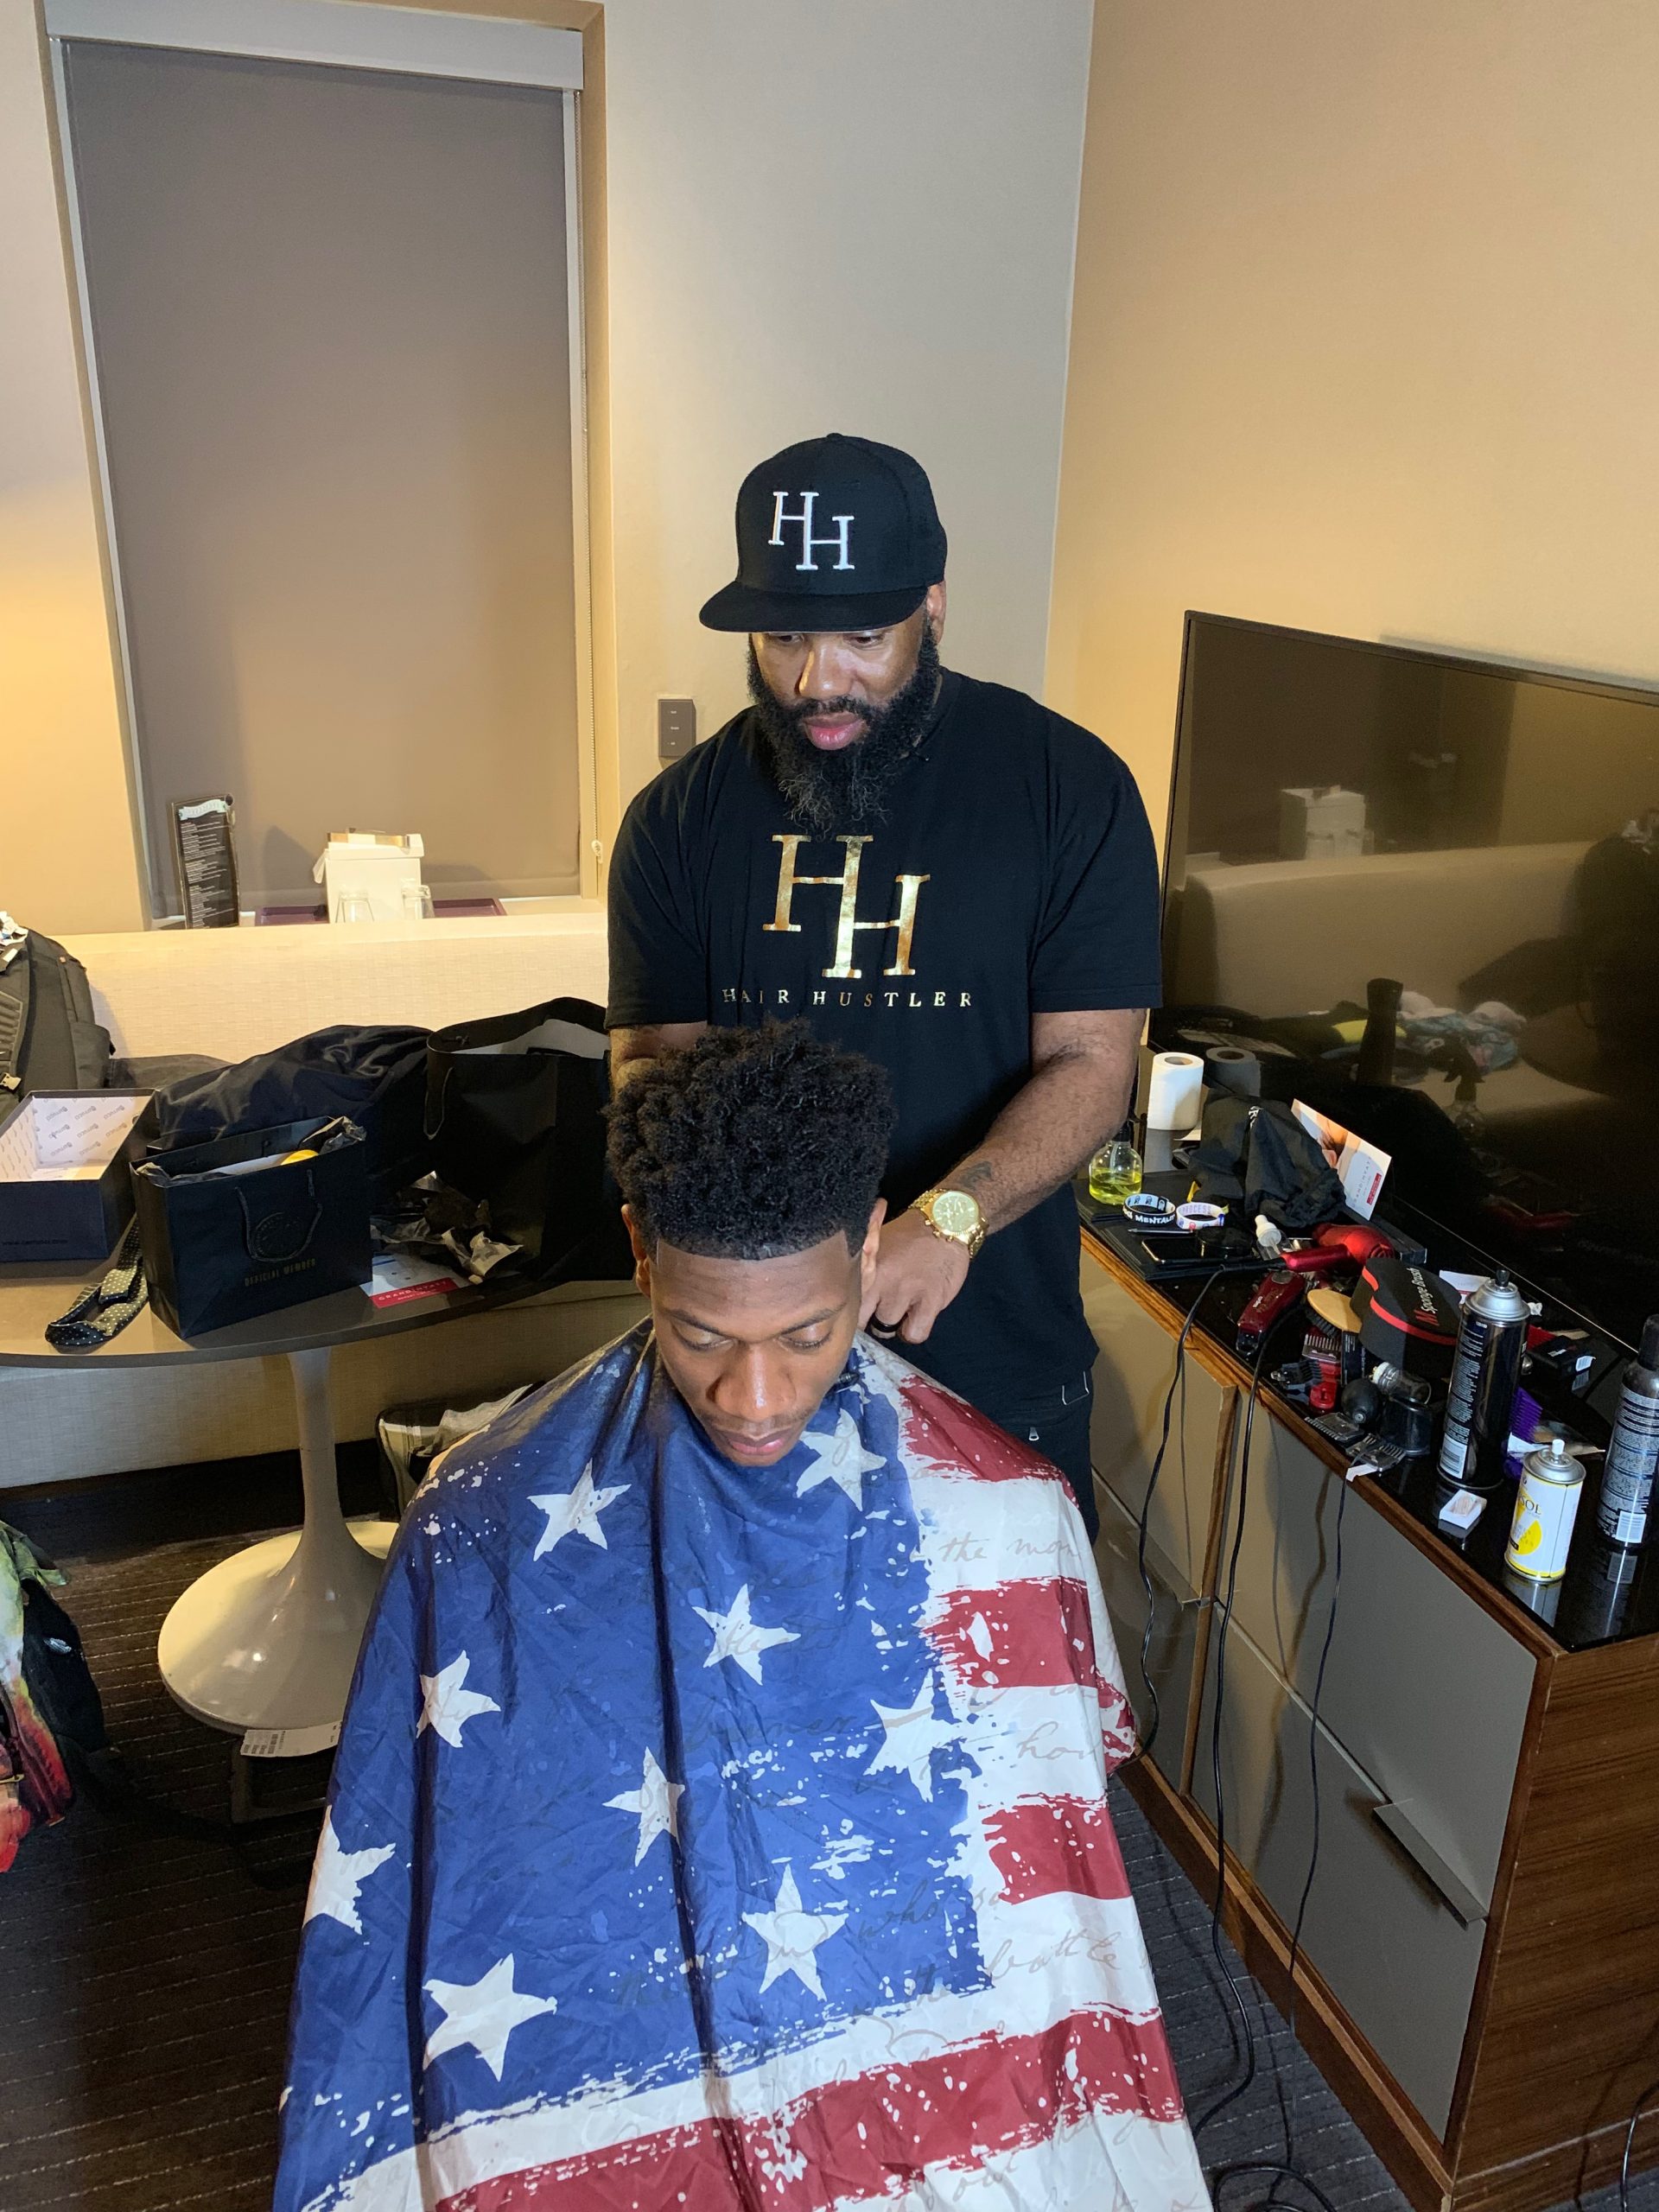 The Barbers and Stylists Behind the NBA's Freshest Cuts and Braids